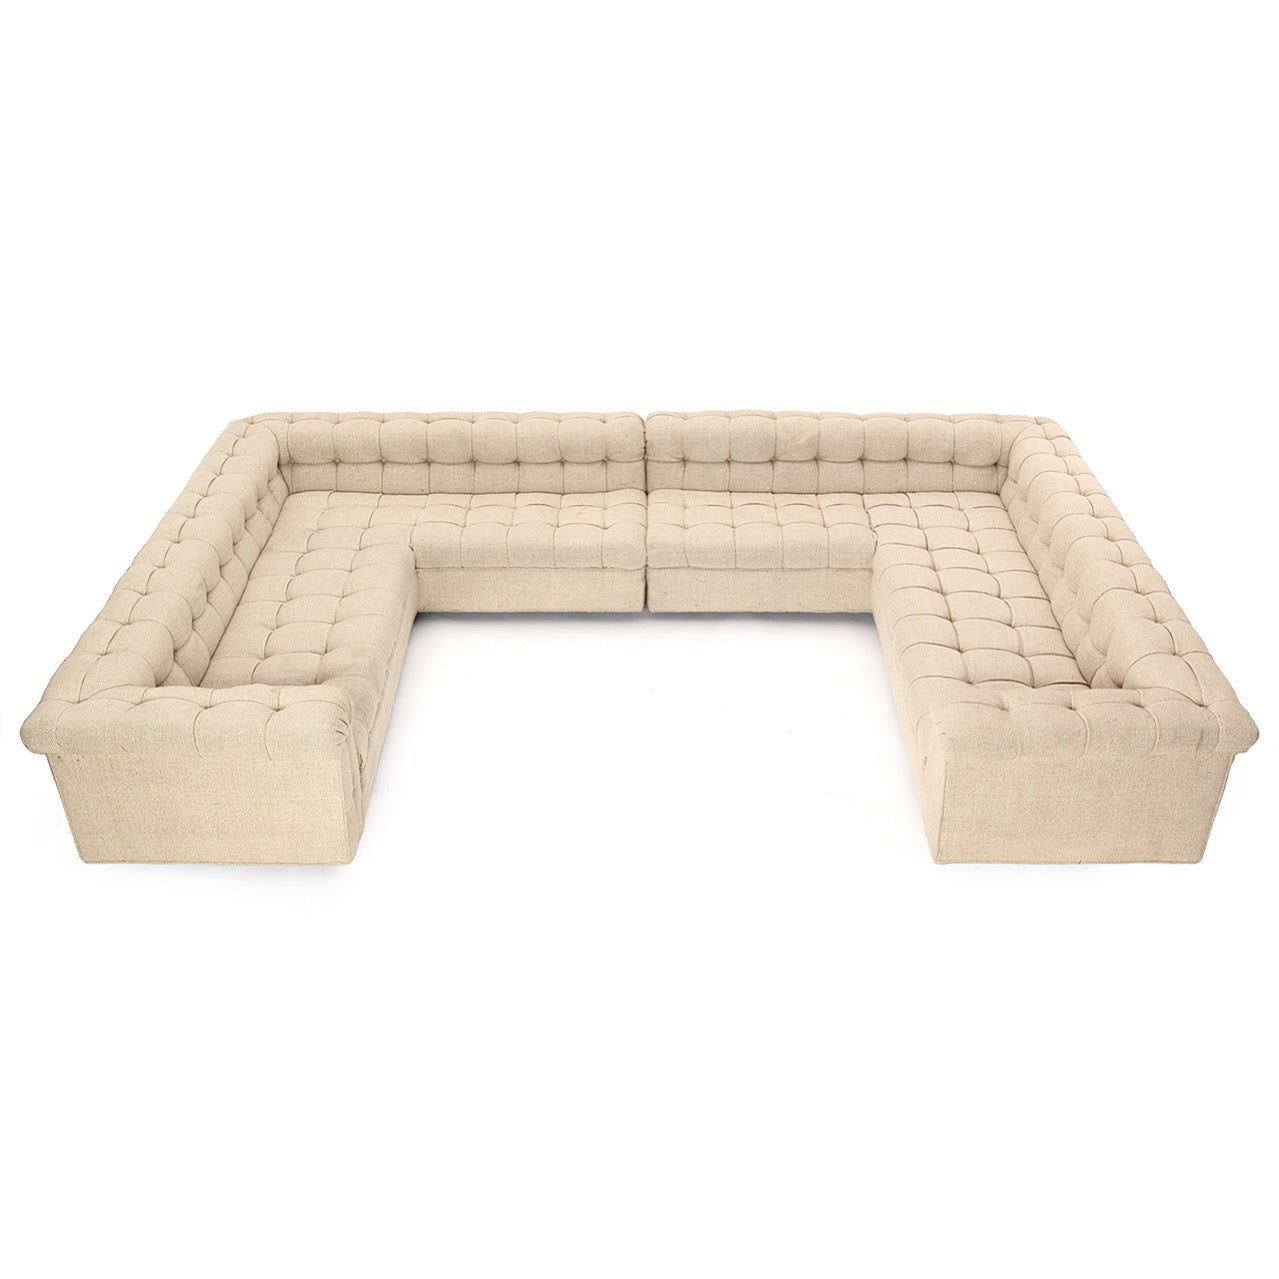 Unique 3 Side 'Party' Chesterfield Sofa by Edward Wormley for Dunbar